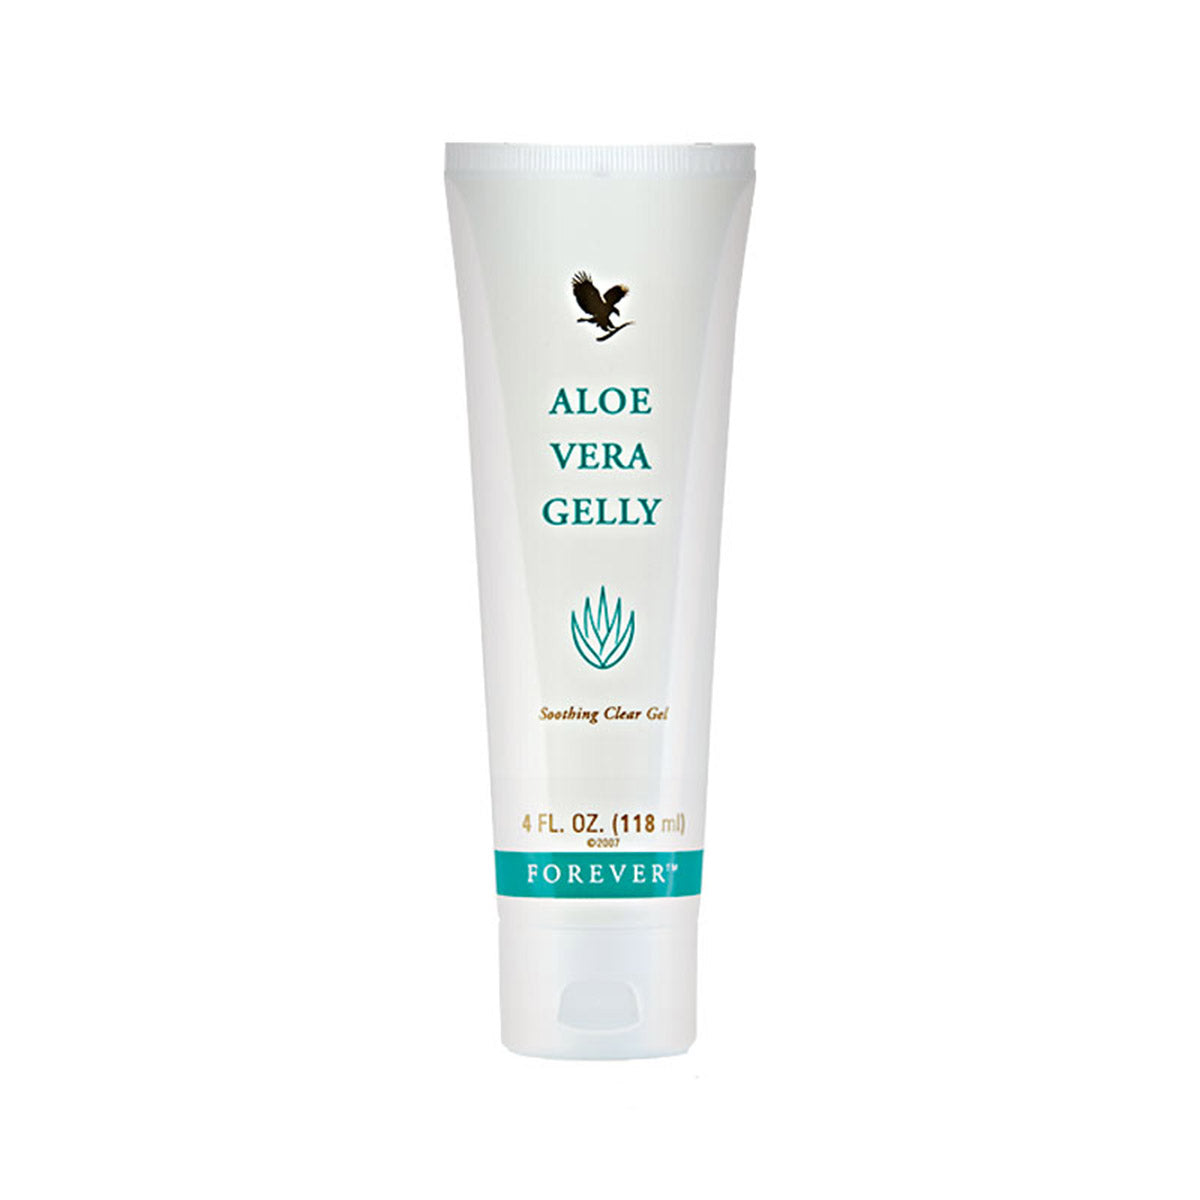 Forever living - Aloe Vera Gelly - Touch of an Angel Wellness and Beauty